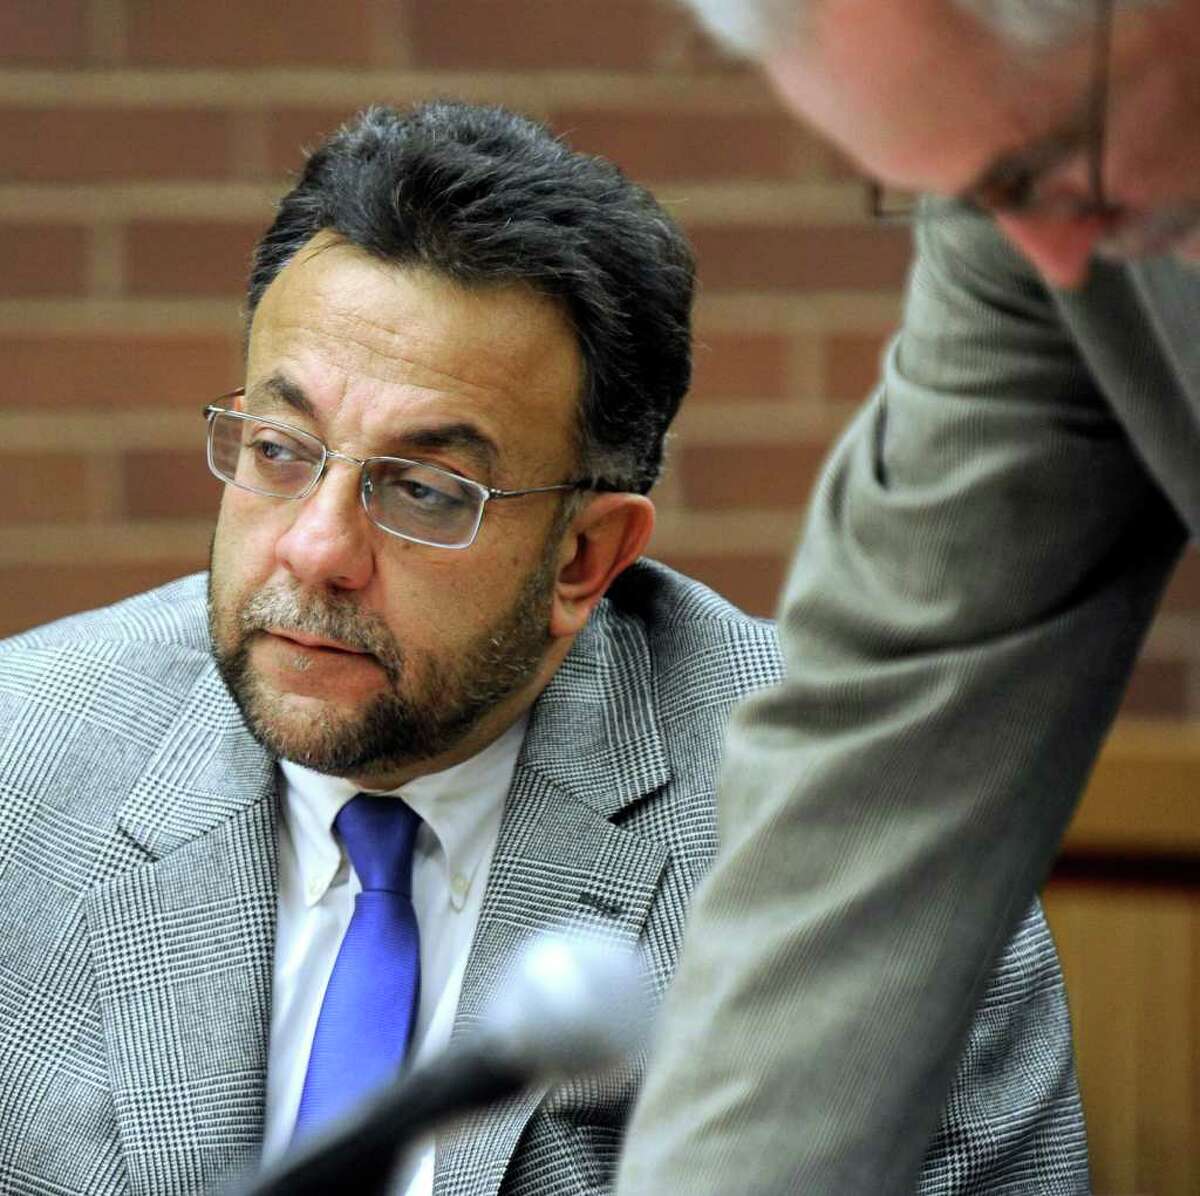 Joseph DaSilva Jr., left, listens to the proceedings Wednesday at the State Superior Court in Danbury, where he is on trial for manslaughter. Photo taken Wednesday, Jan. 11, 2012.